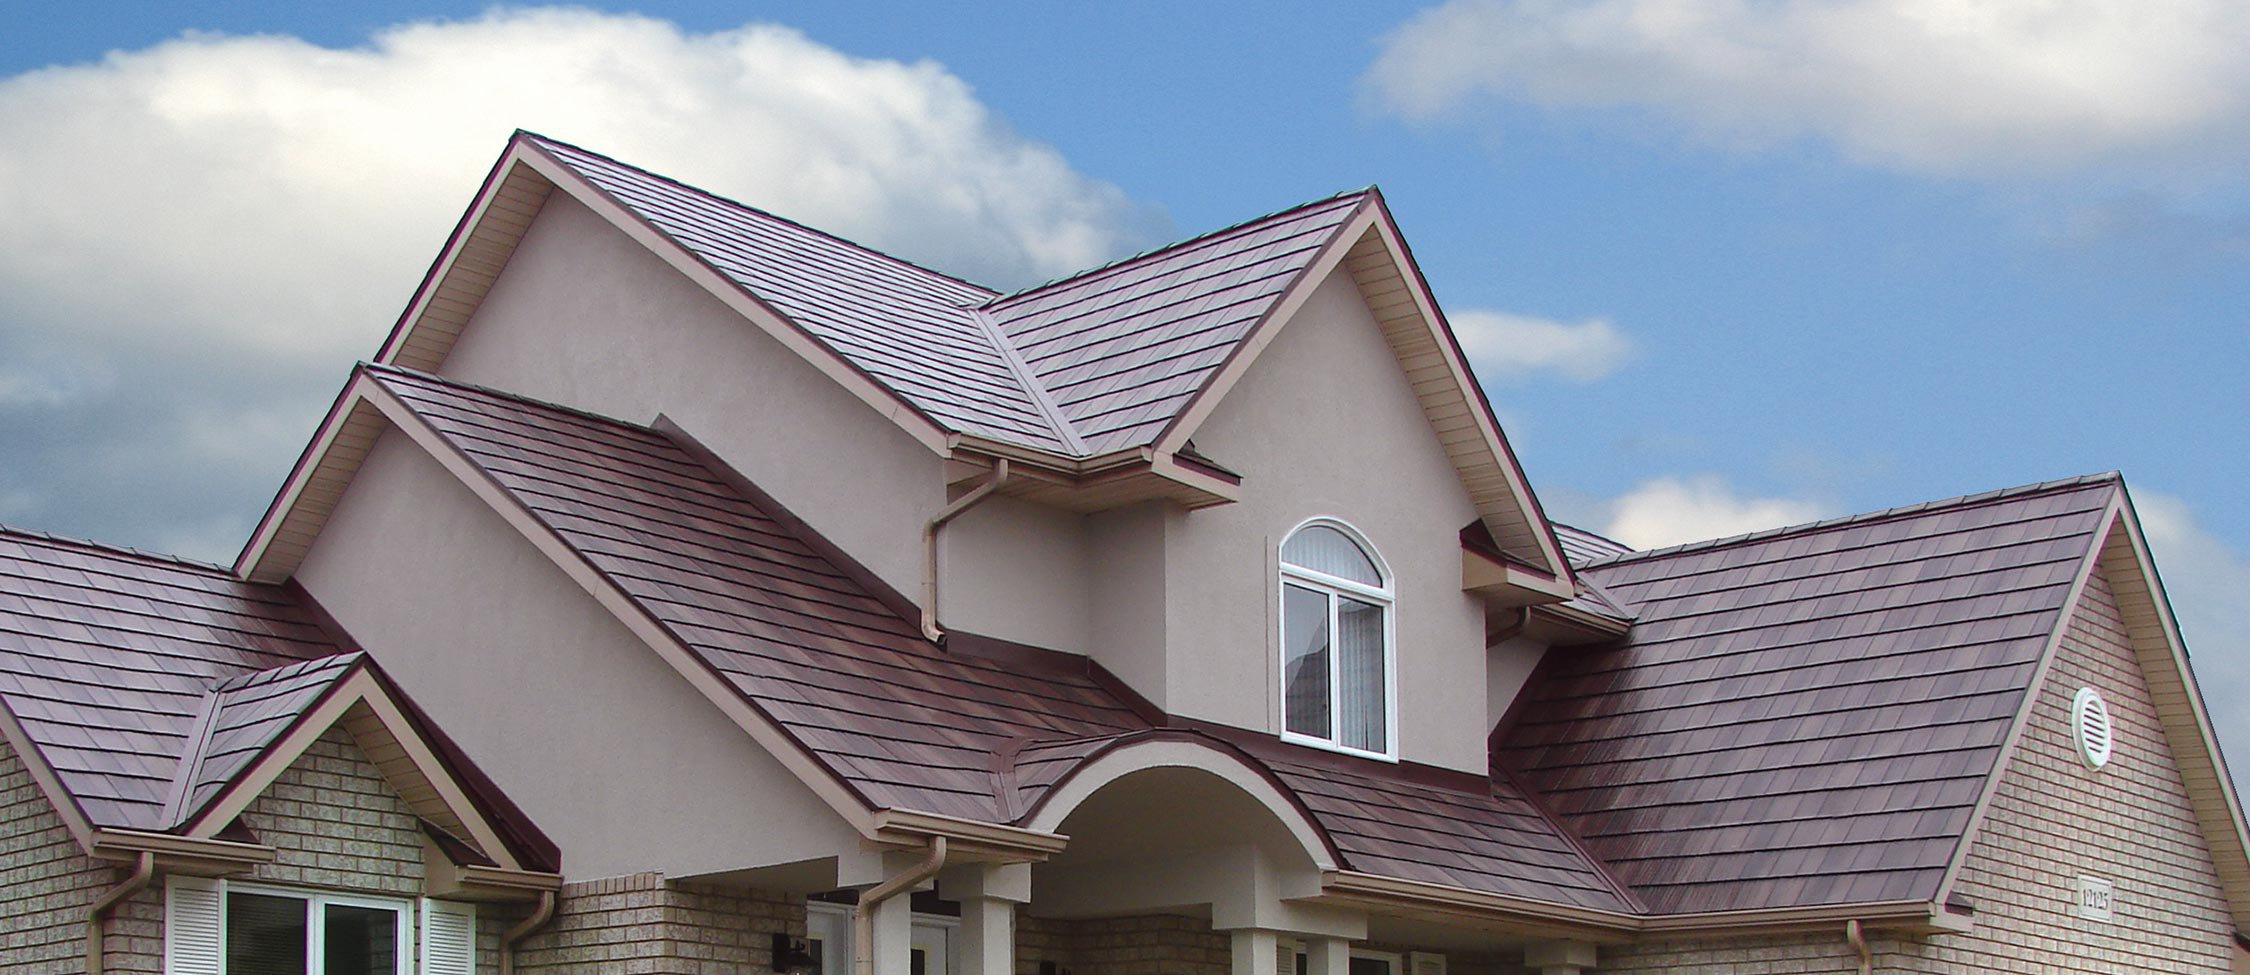 Roofing Companies Killeen Tx – Timely Service And Best Materials For Roofing